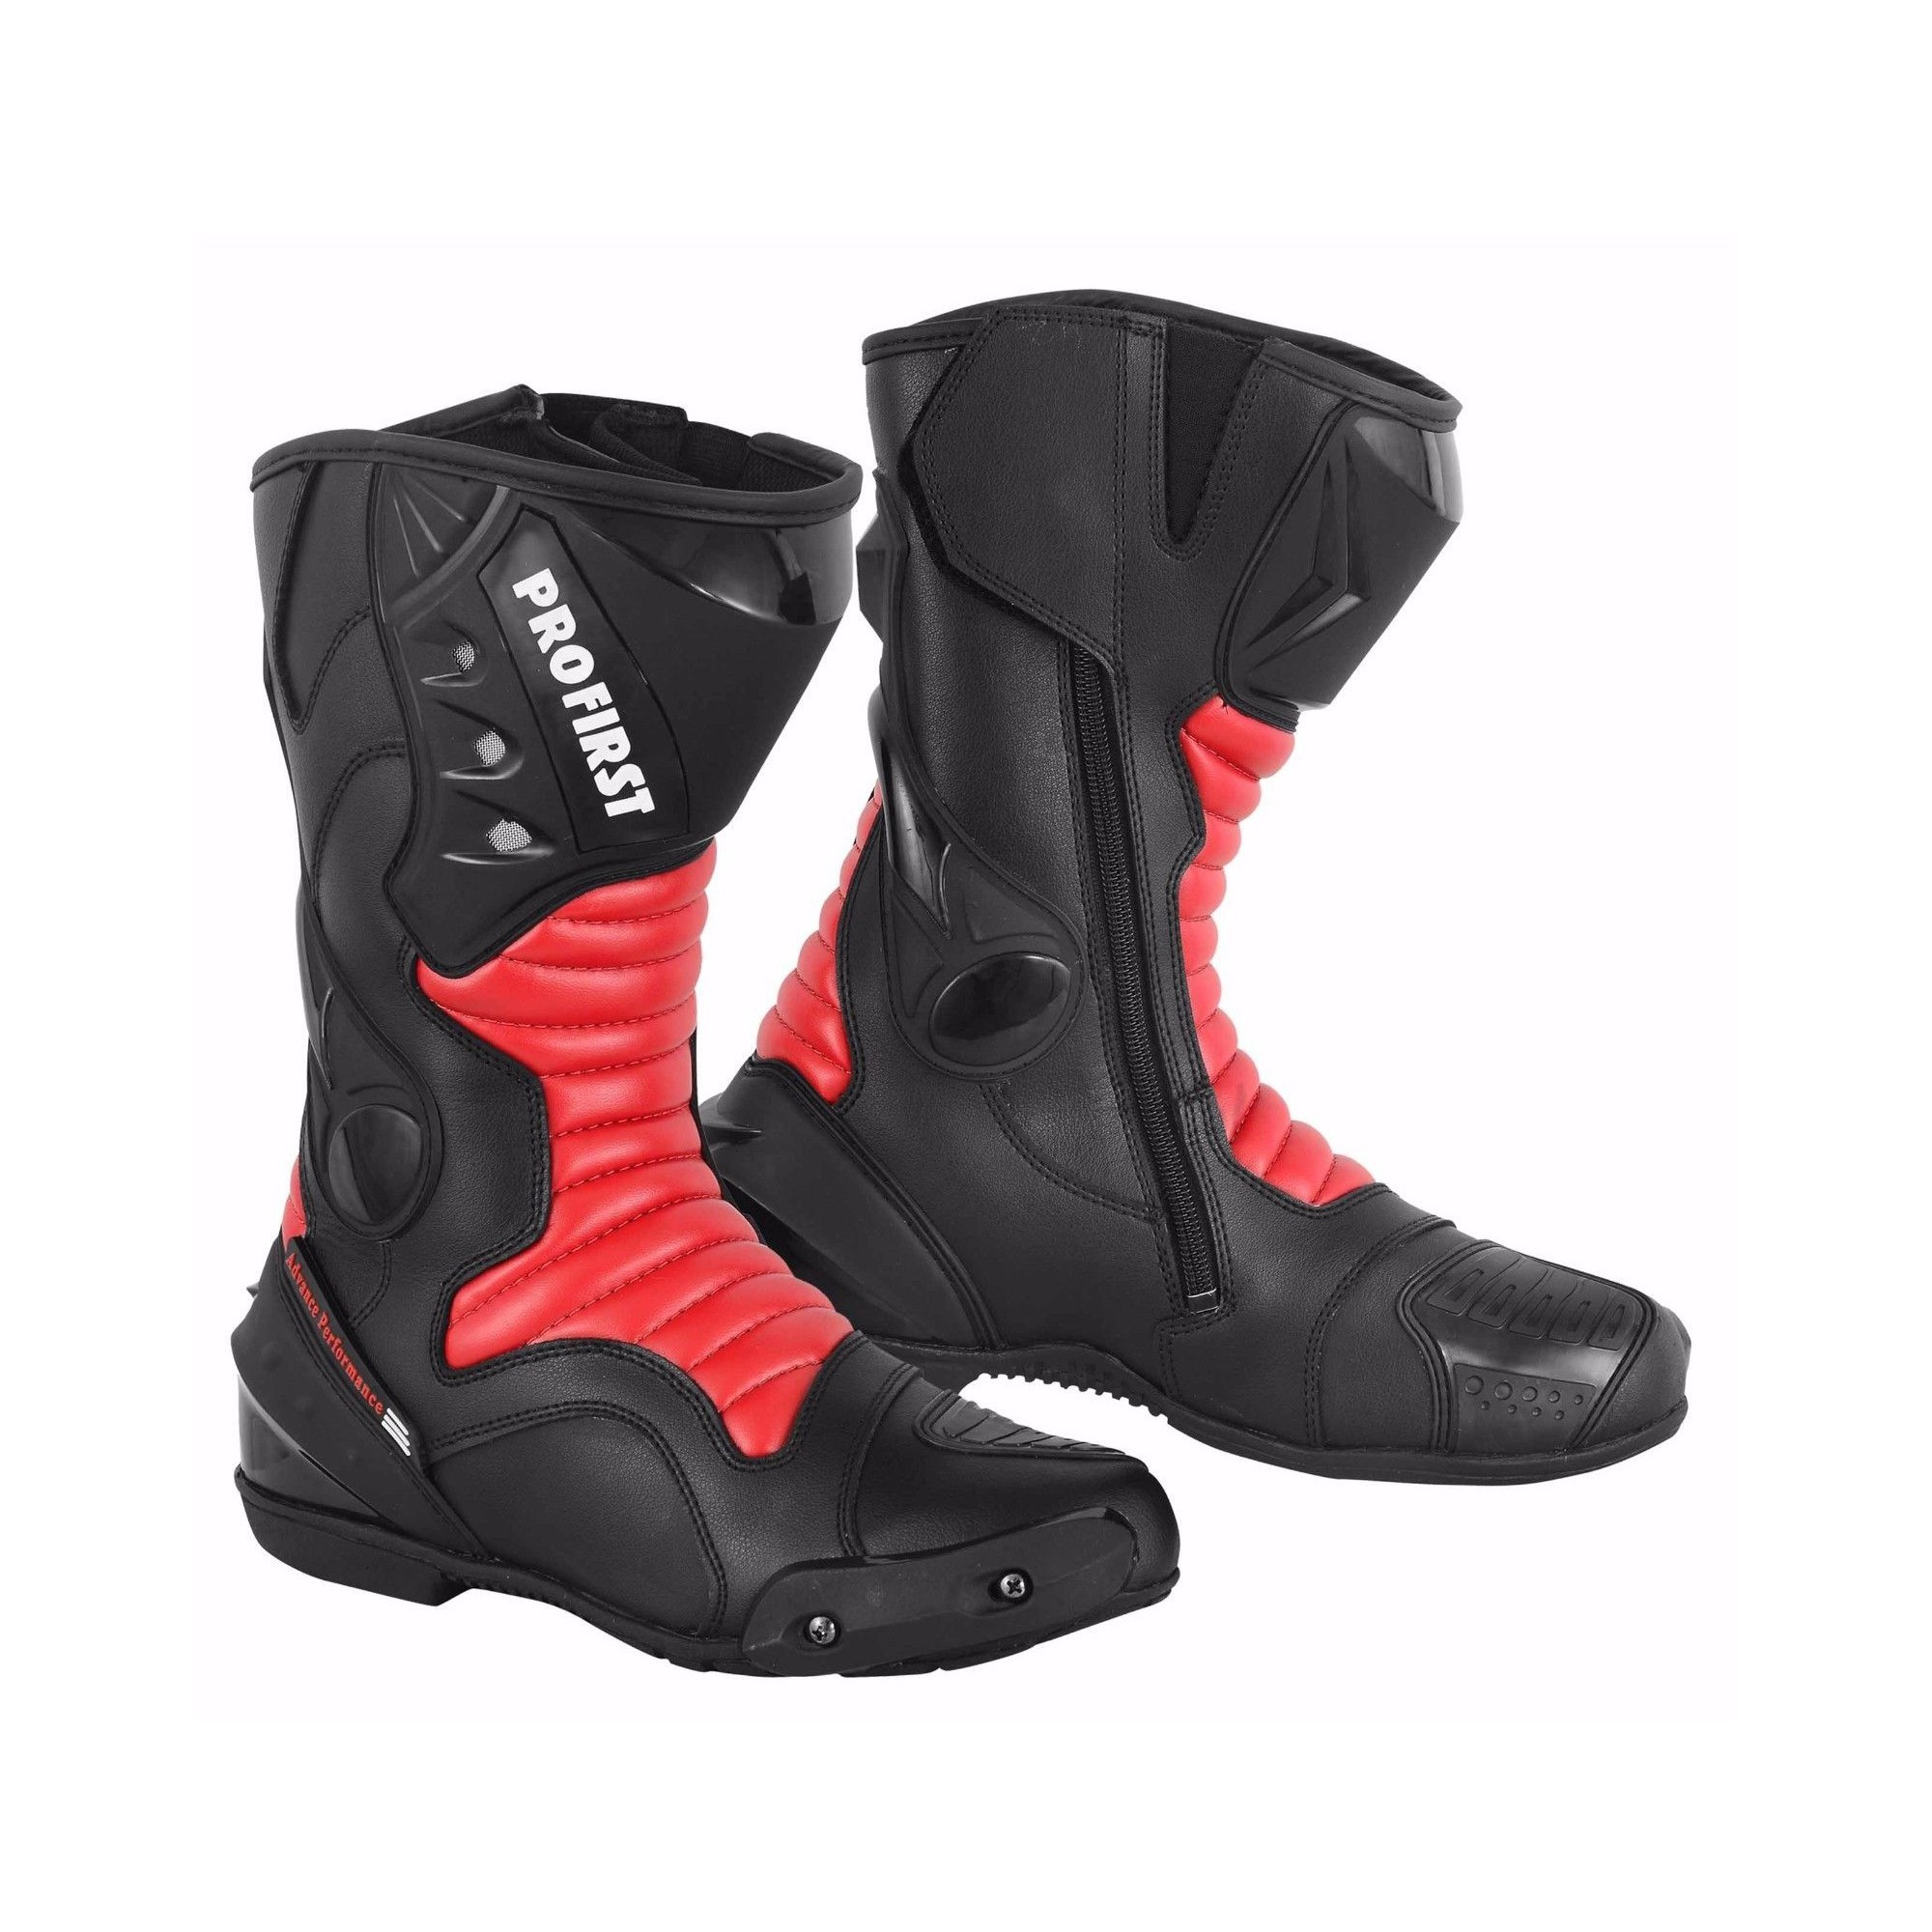 Red & Black PROFIRST Split Leather Motorcycle Boots Waterproof Motorbike Shoes Armoured Boot Protection Anti Slip Racing Sports EU 39 UK 5